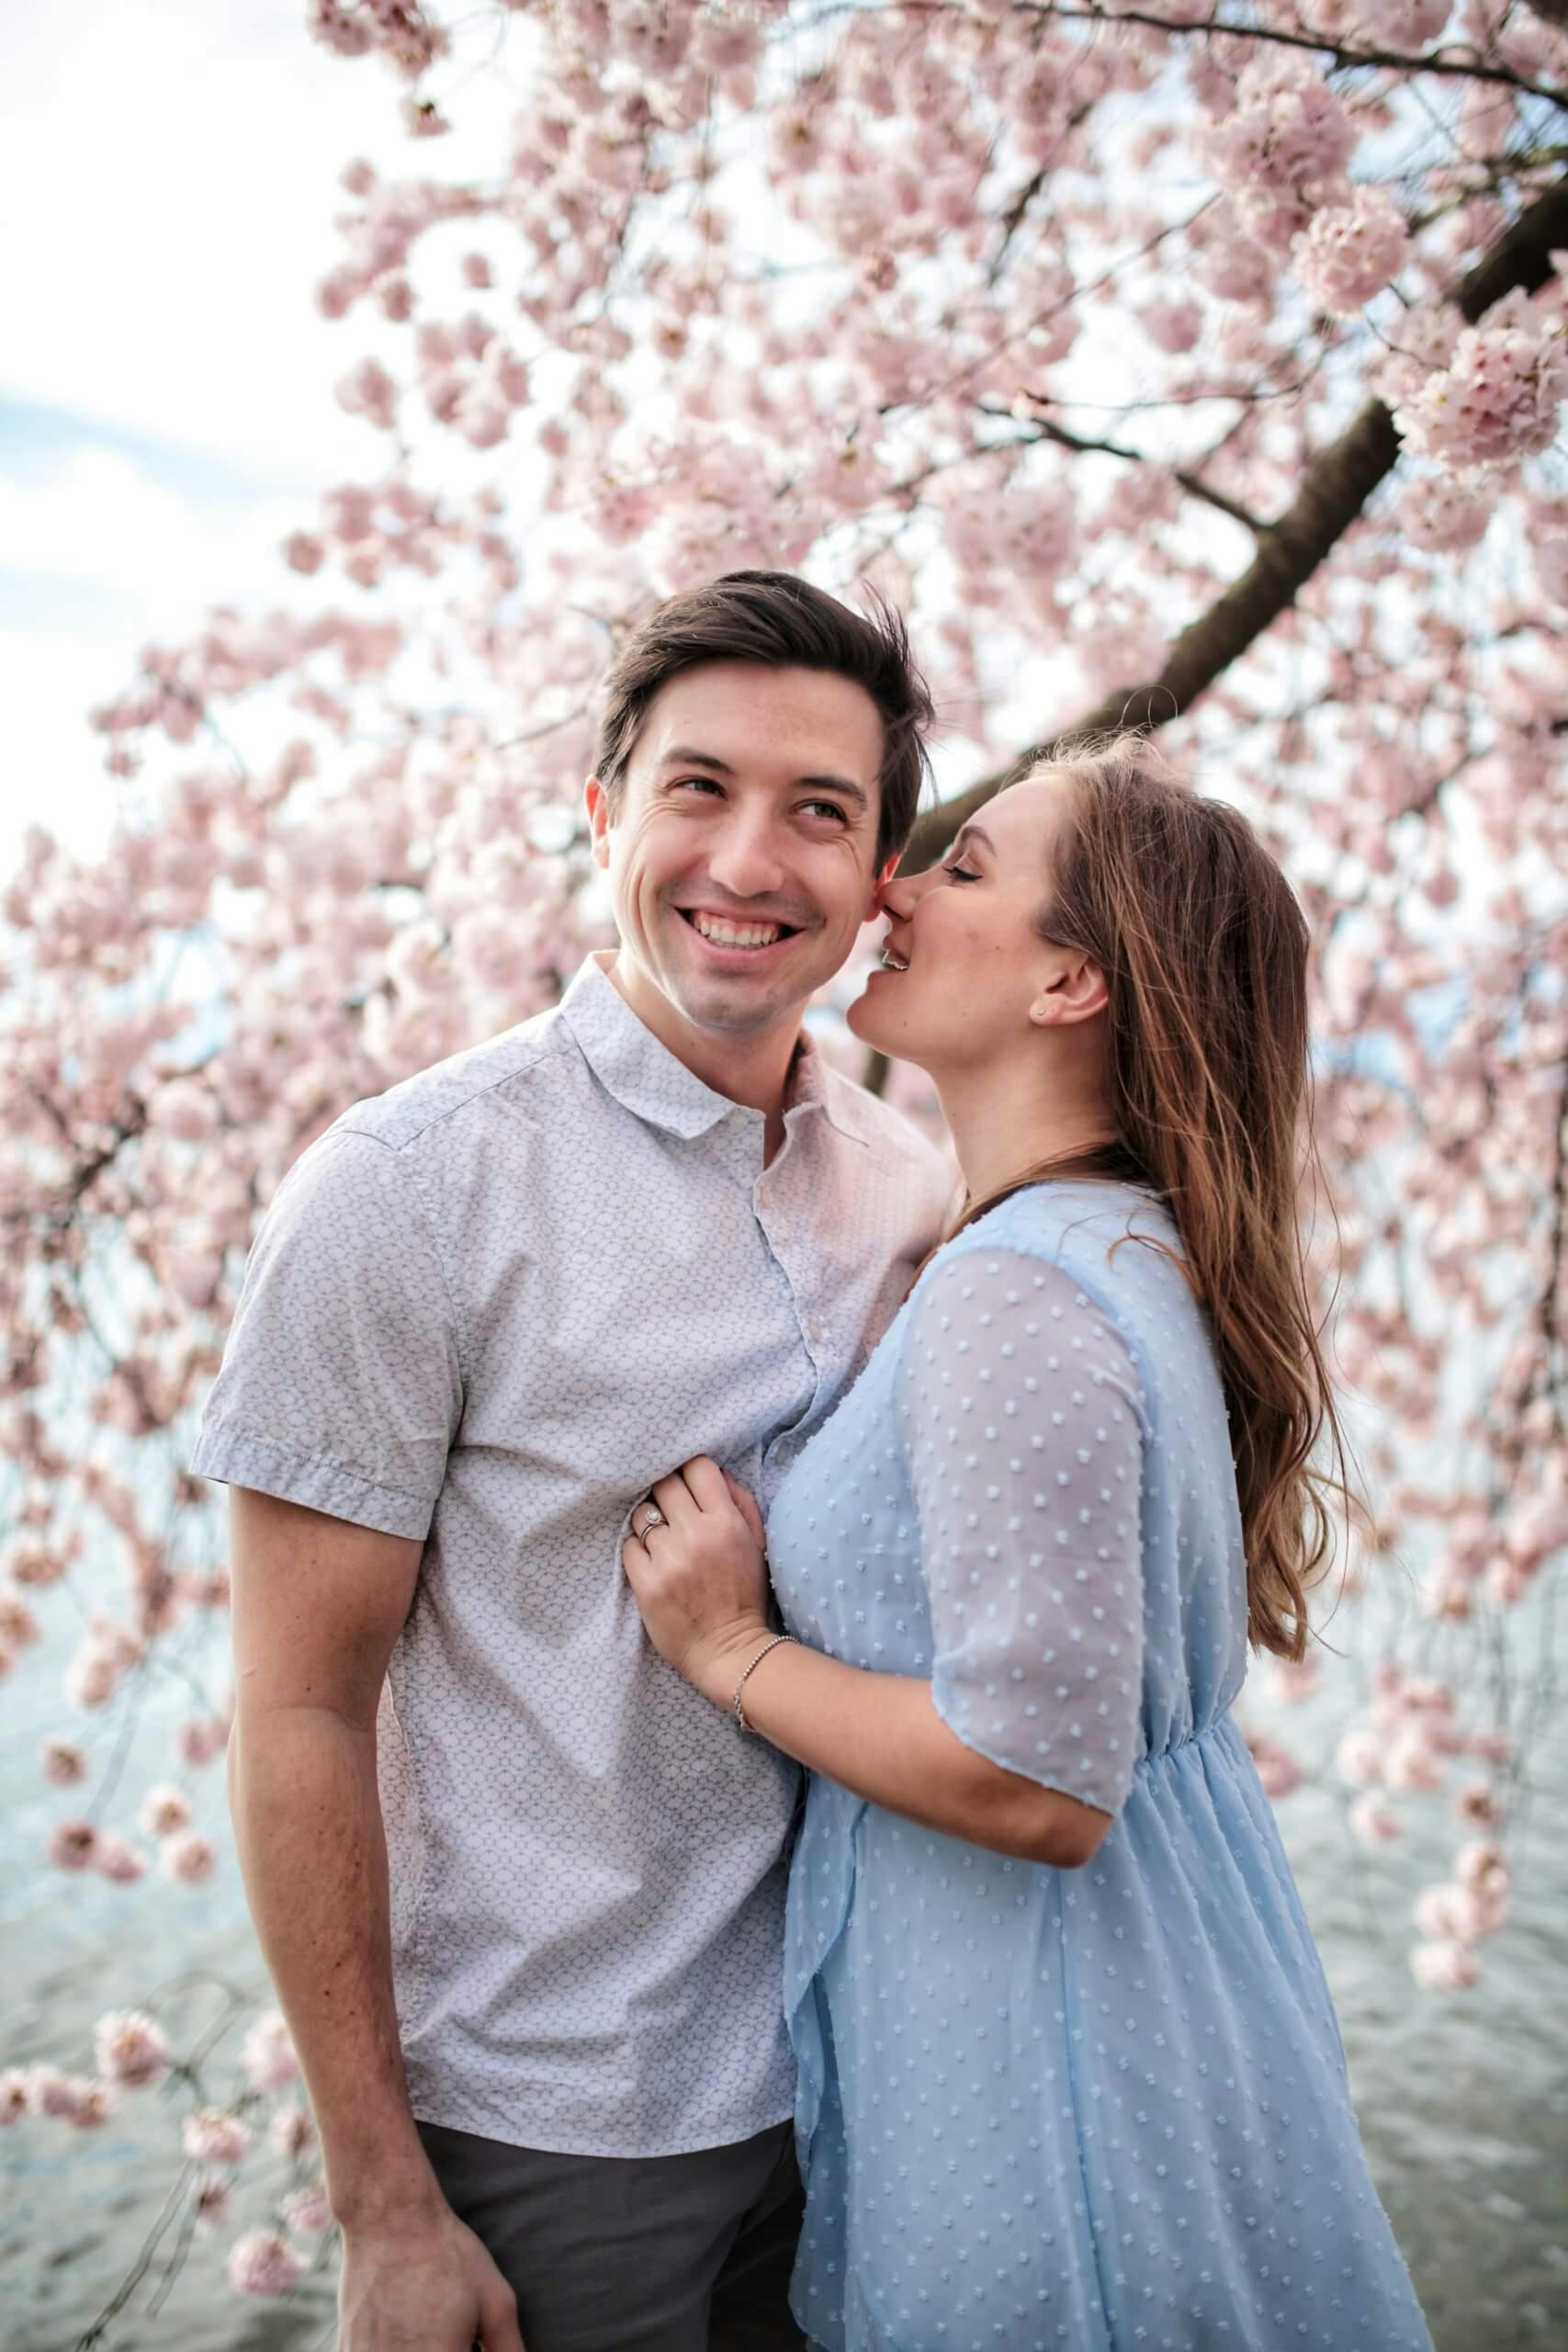 A couple with a woman kissing a man on the cheek under cherry blossom trees.